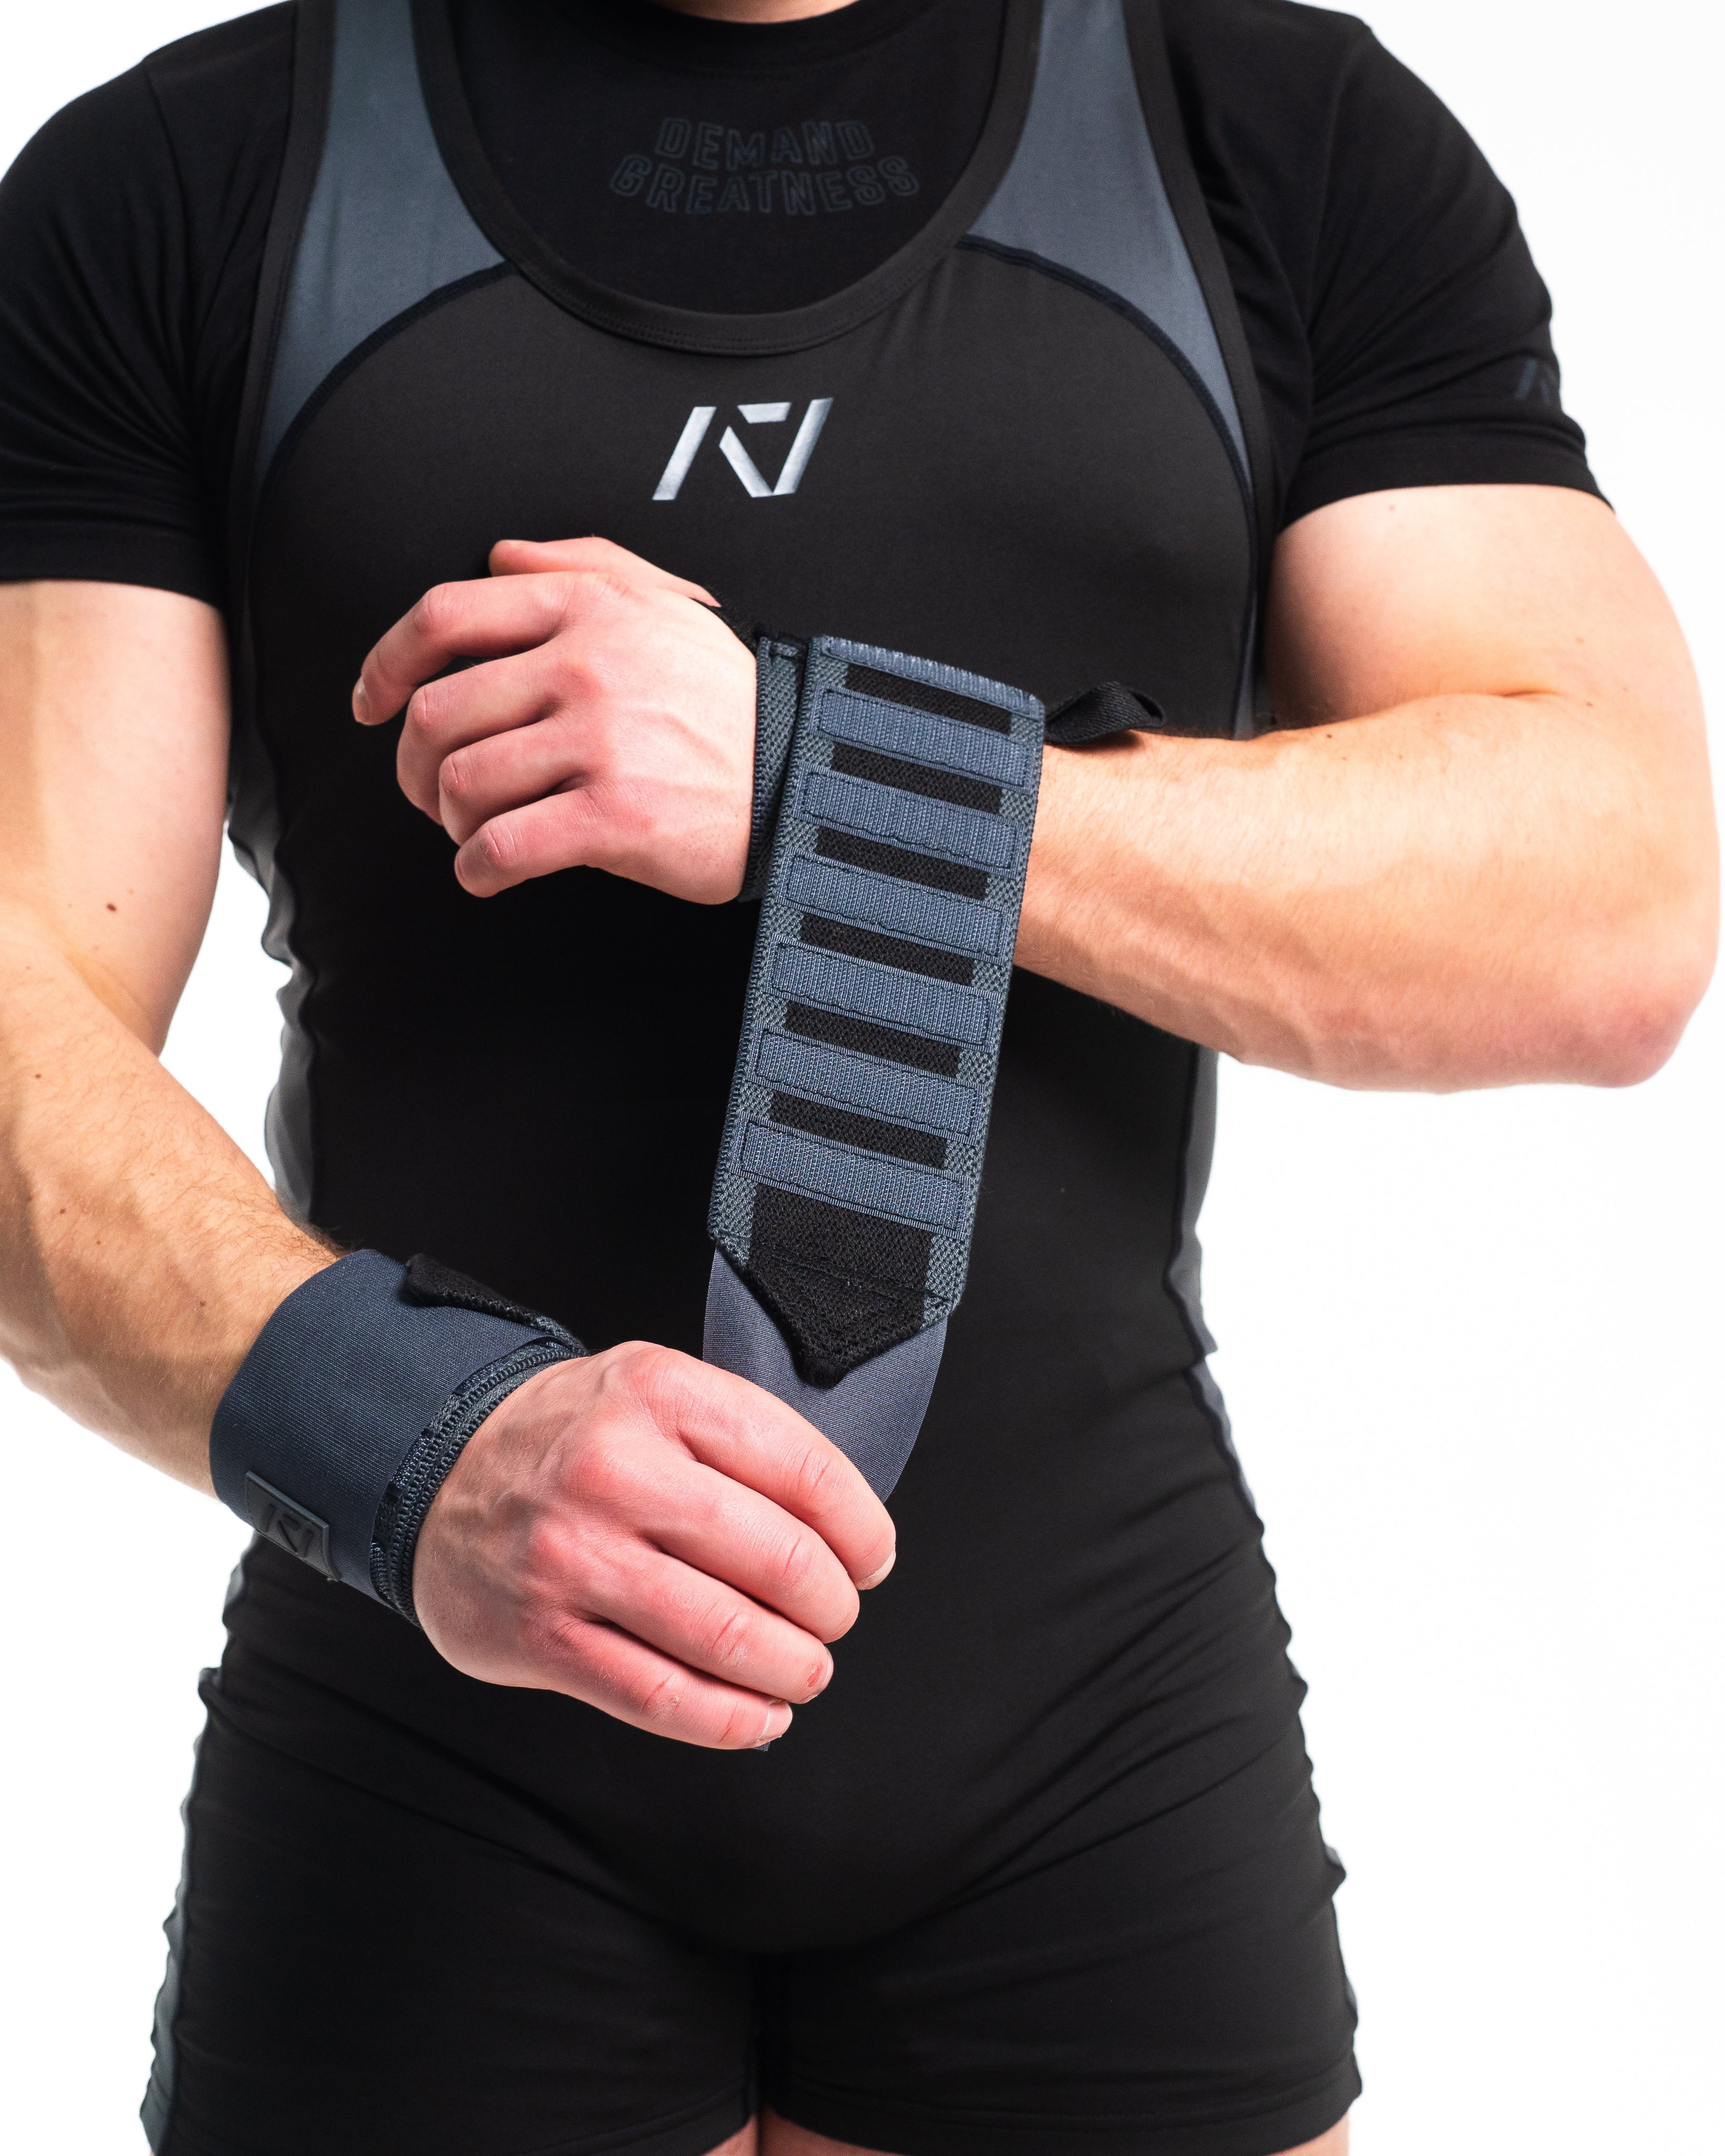 A7 IPF Approved Zebra Wraps feature strips of velcro on the wraps, allowing Zebra Wraps to conform fully to your unique preference of tightness. We offer Zebra wrist wraps in 3 lengths and 4 stiffnesses (Flexi, Mids, Stiff, and Rigor Mortis). The IPF Approved Kit includes Powerlifting Singlet, A7 Meet Shirt, A7 Zebra Wrist Wraps, A7 Deadlift Socks, Hourglass Knee Sleeves (Stiff Knee Sleeves and Rigor Mortis Knee Sleeves). All A7 Powerlifting Equipment shipping to UK, Norway, Switzerland and Iceland.